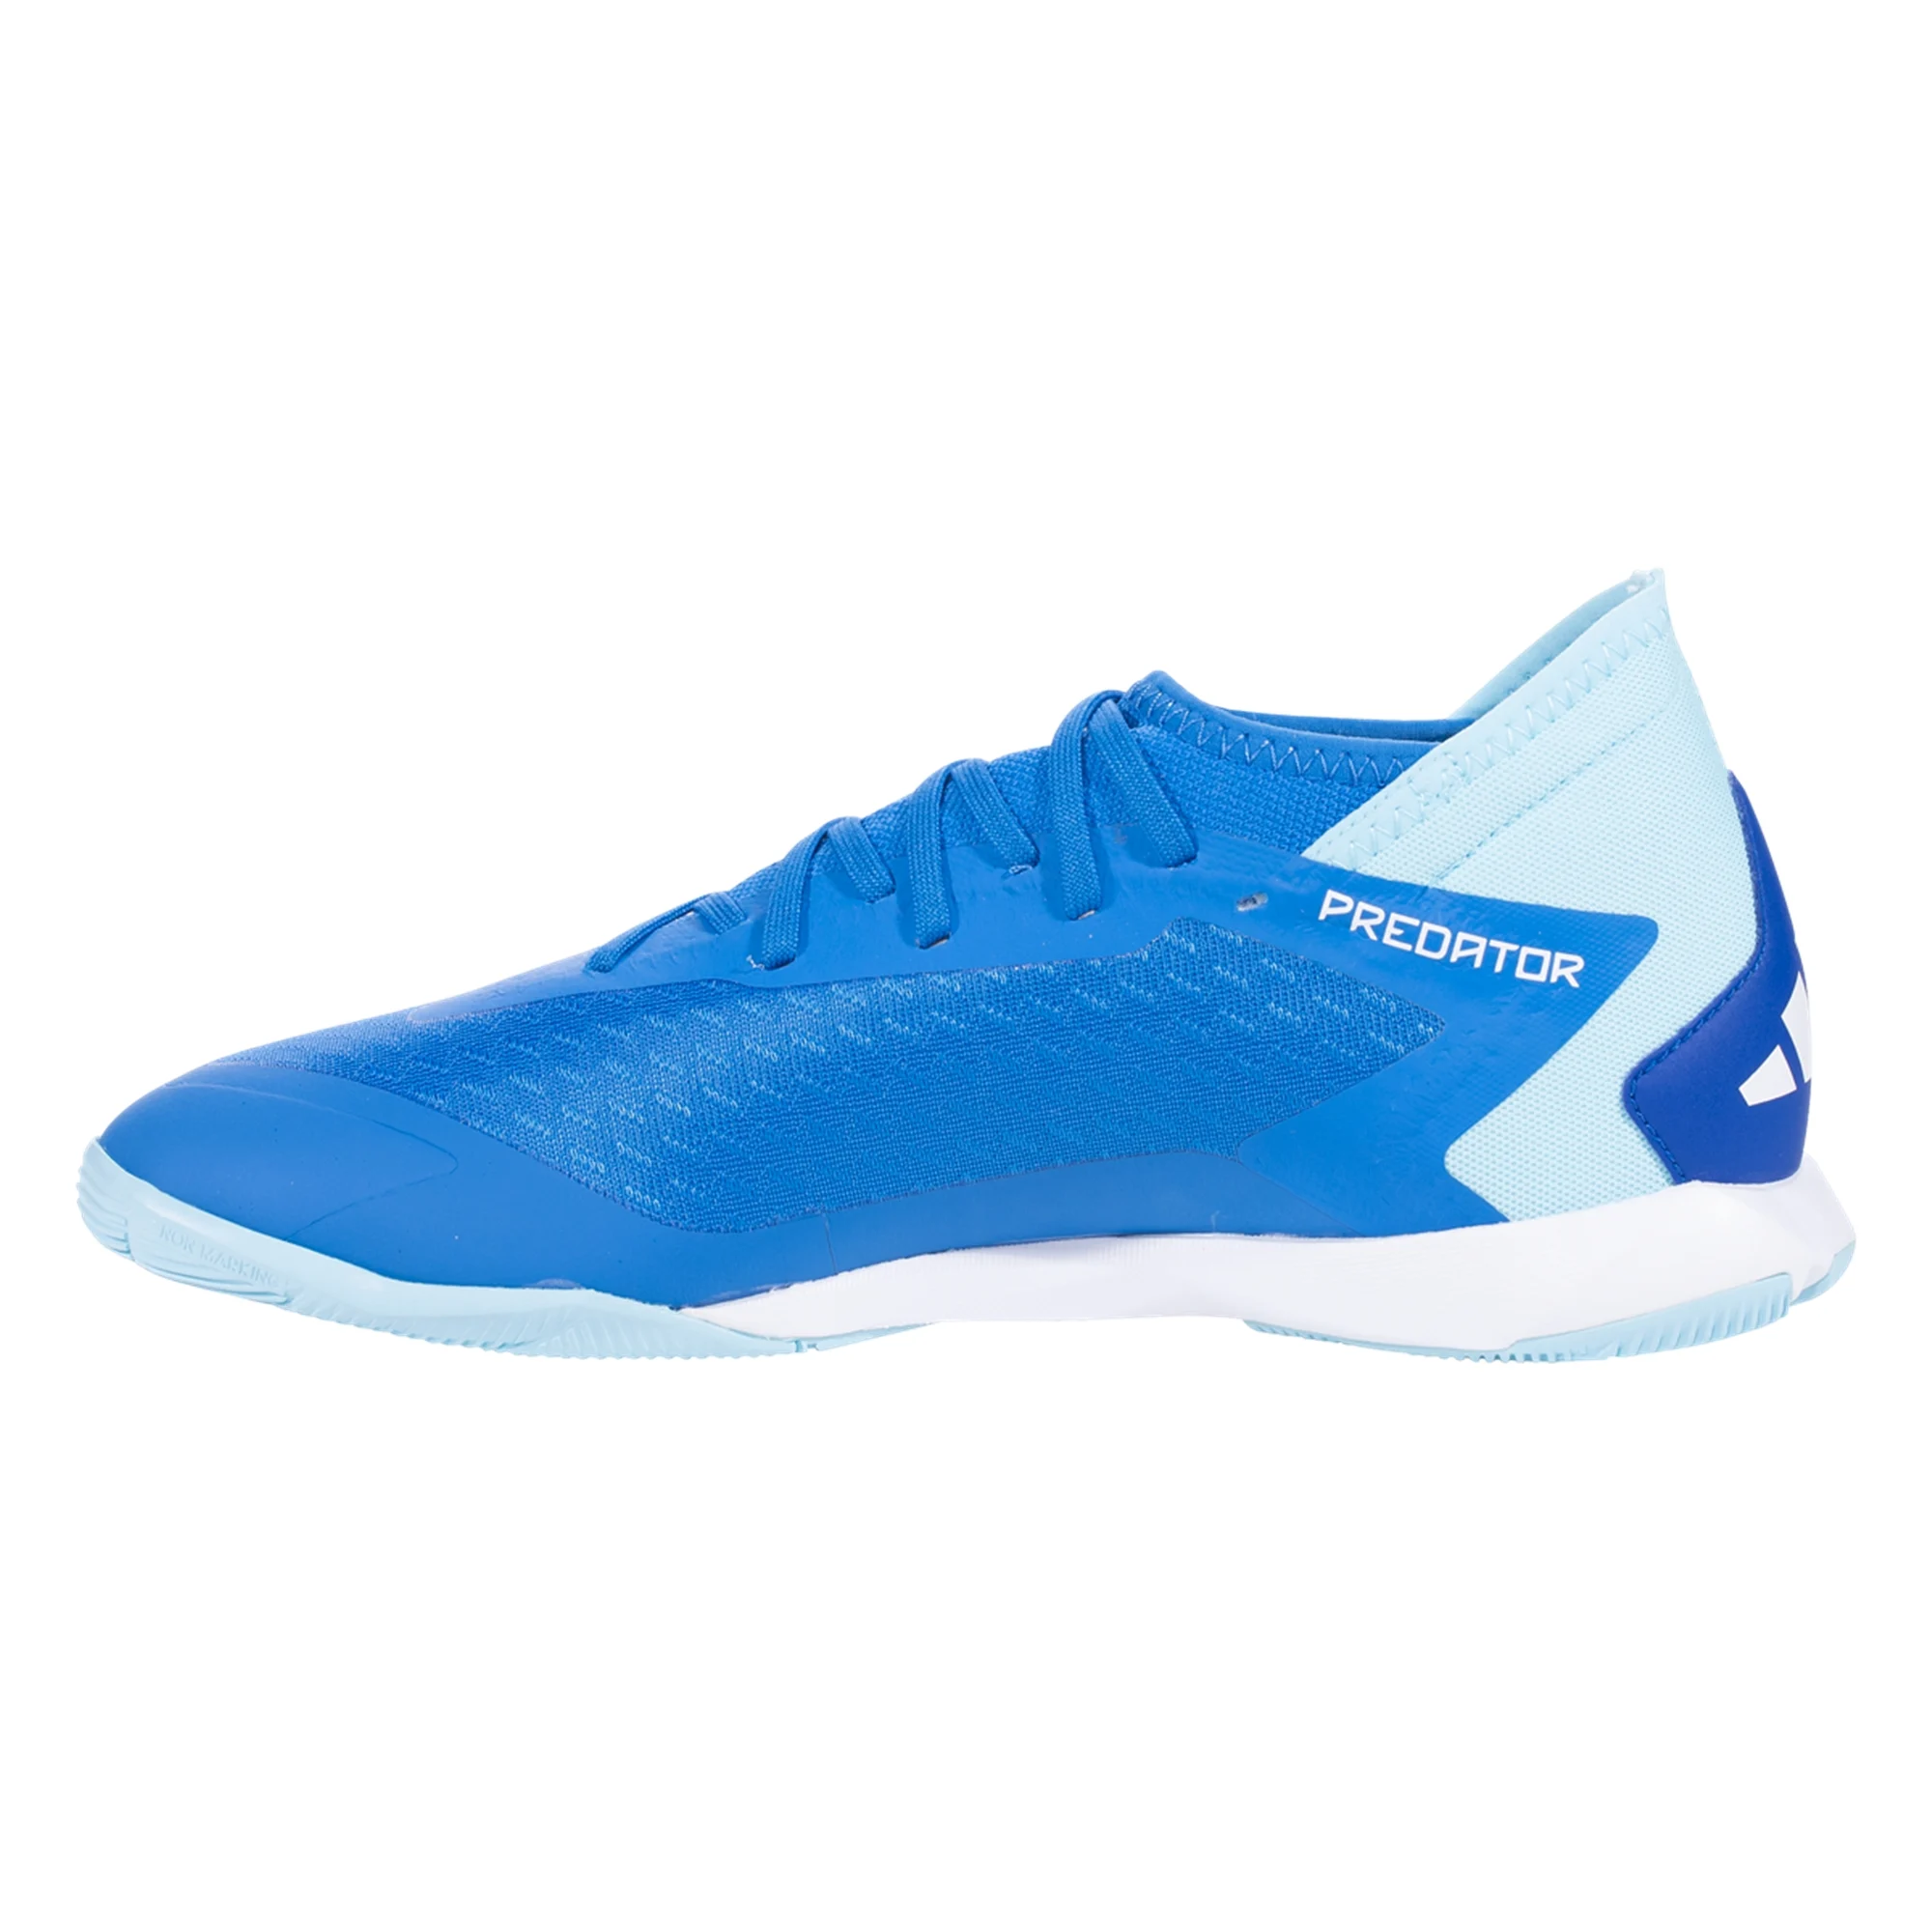 Accuracy.3 Indoor Royal/Bliss Blu Wearhouse - (Bright Soccer Predator Soccer adidas Shoes